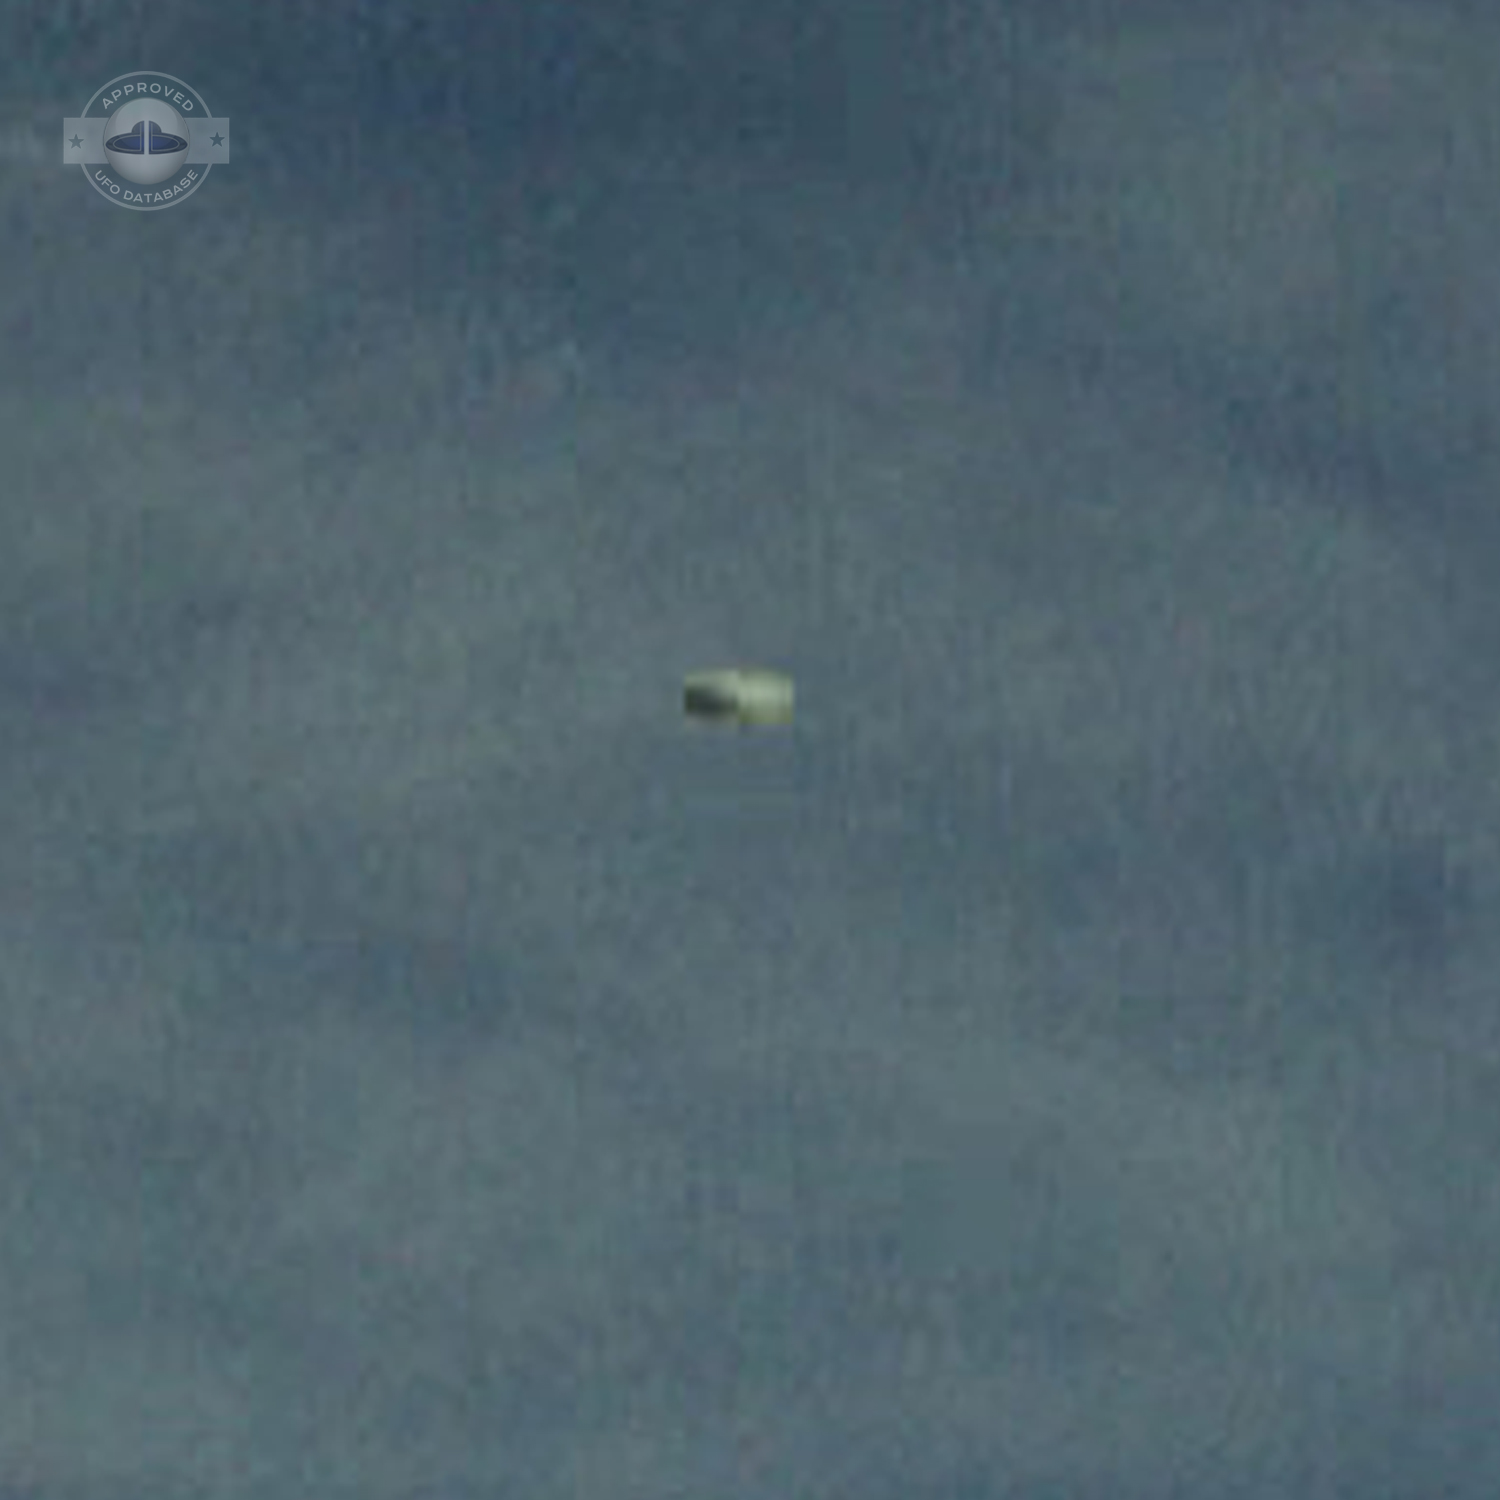 UFO Faster than anything on Earth caught on Video frame | Germany 2011 UFO Picture #213-4